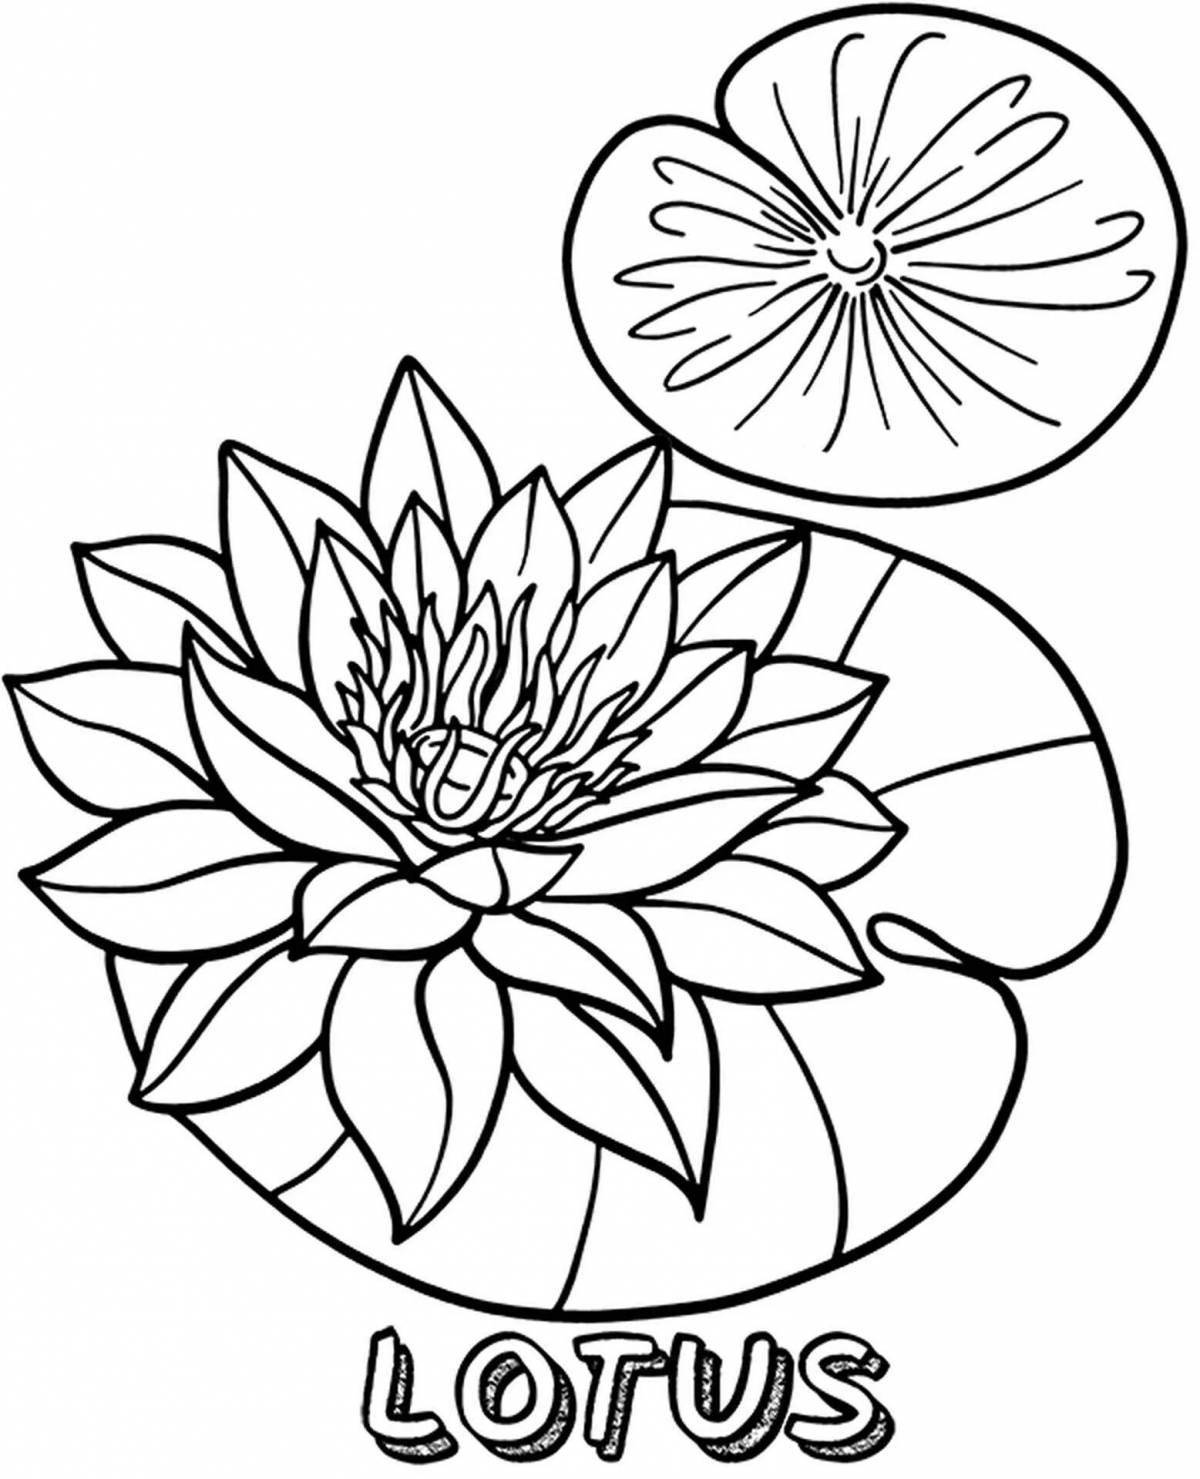 Glitter lotus coloring book for kids